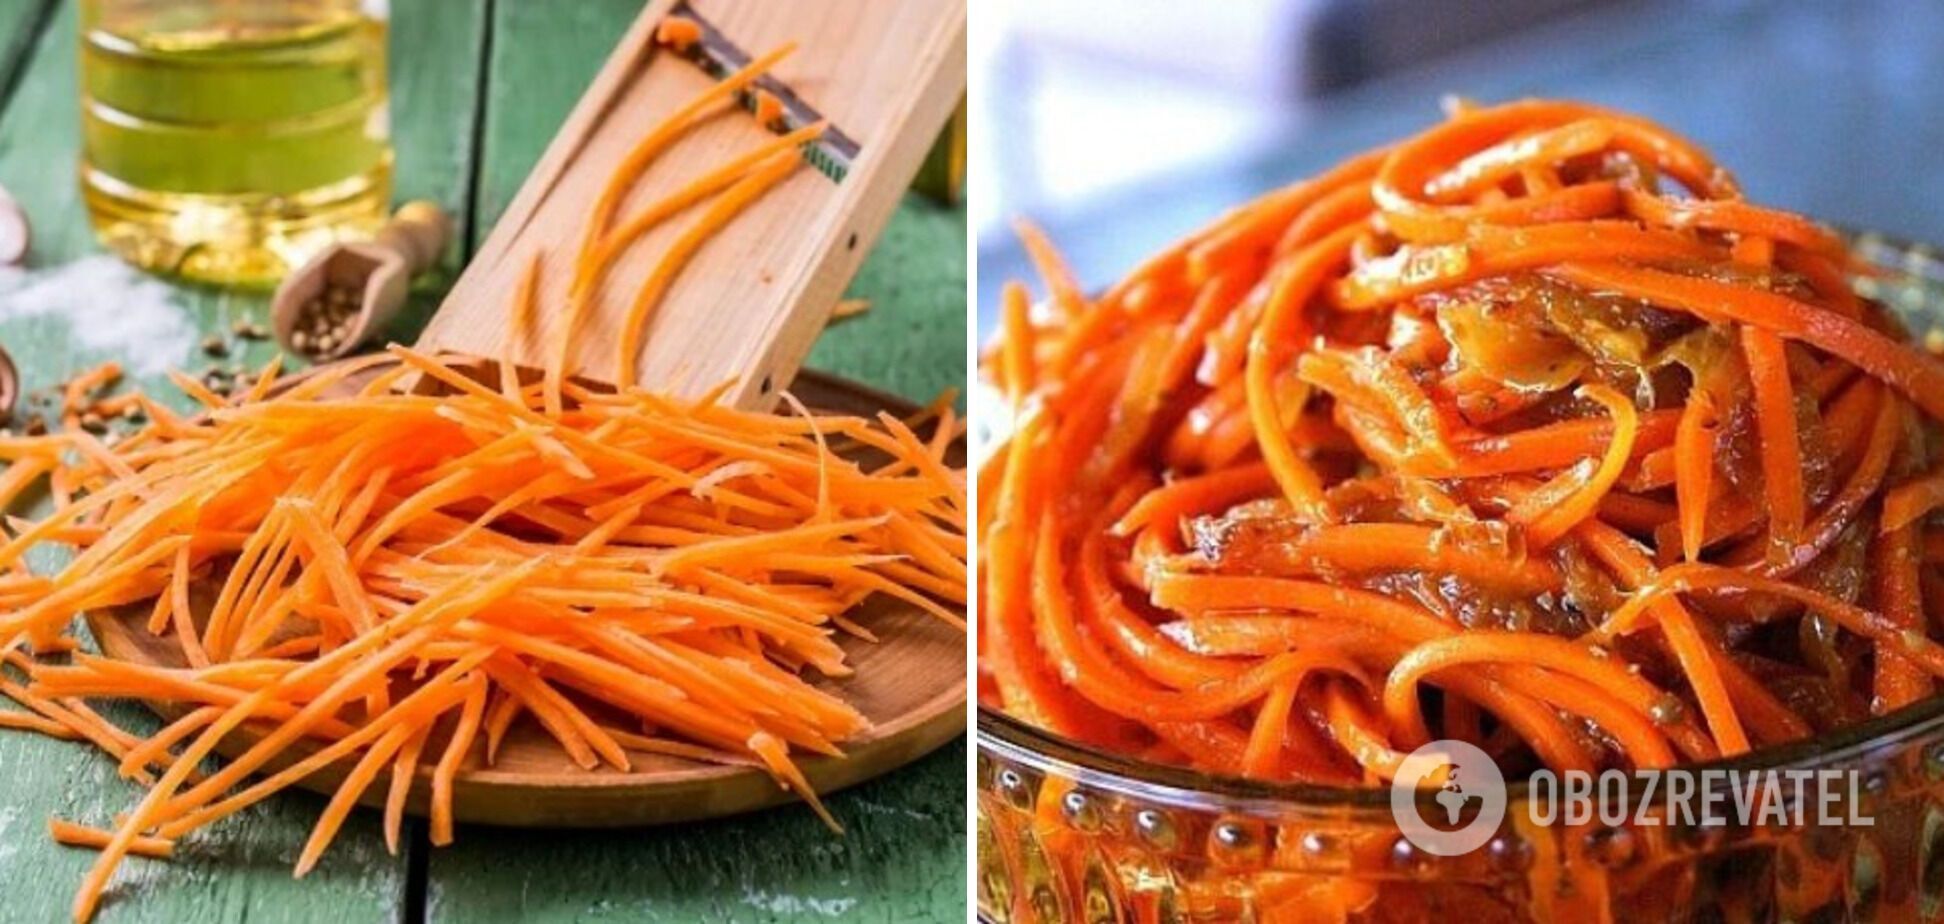 How to cook carrots deliciously in Korean